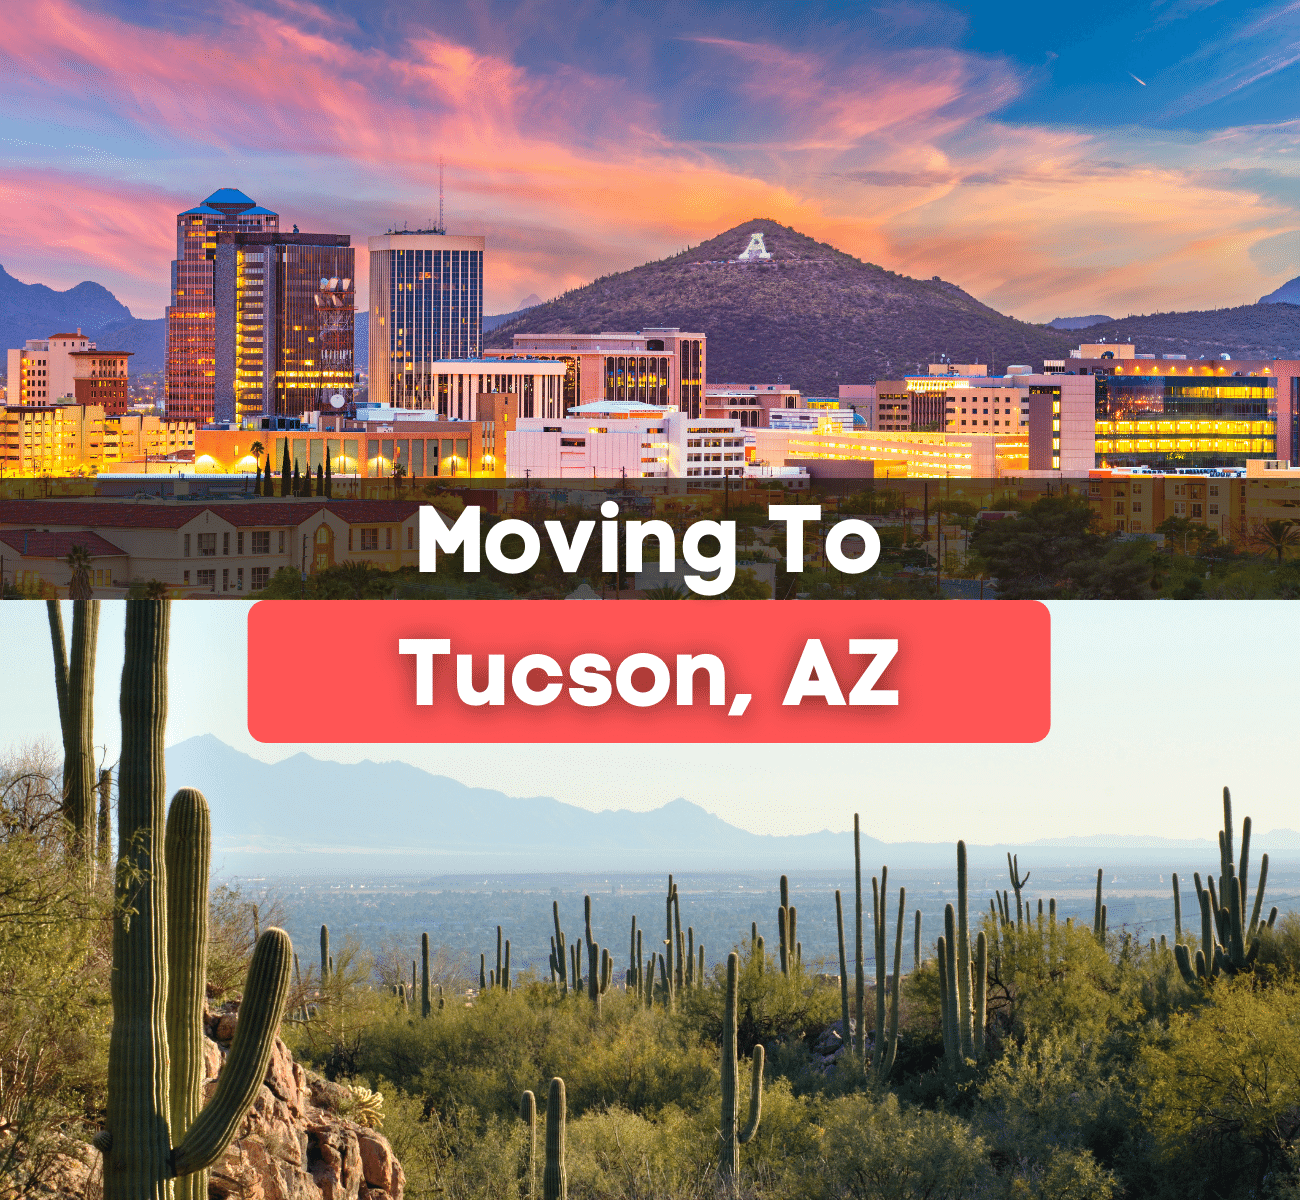 Moving to Tucson, Arizona - What is it like living in Tucson?